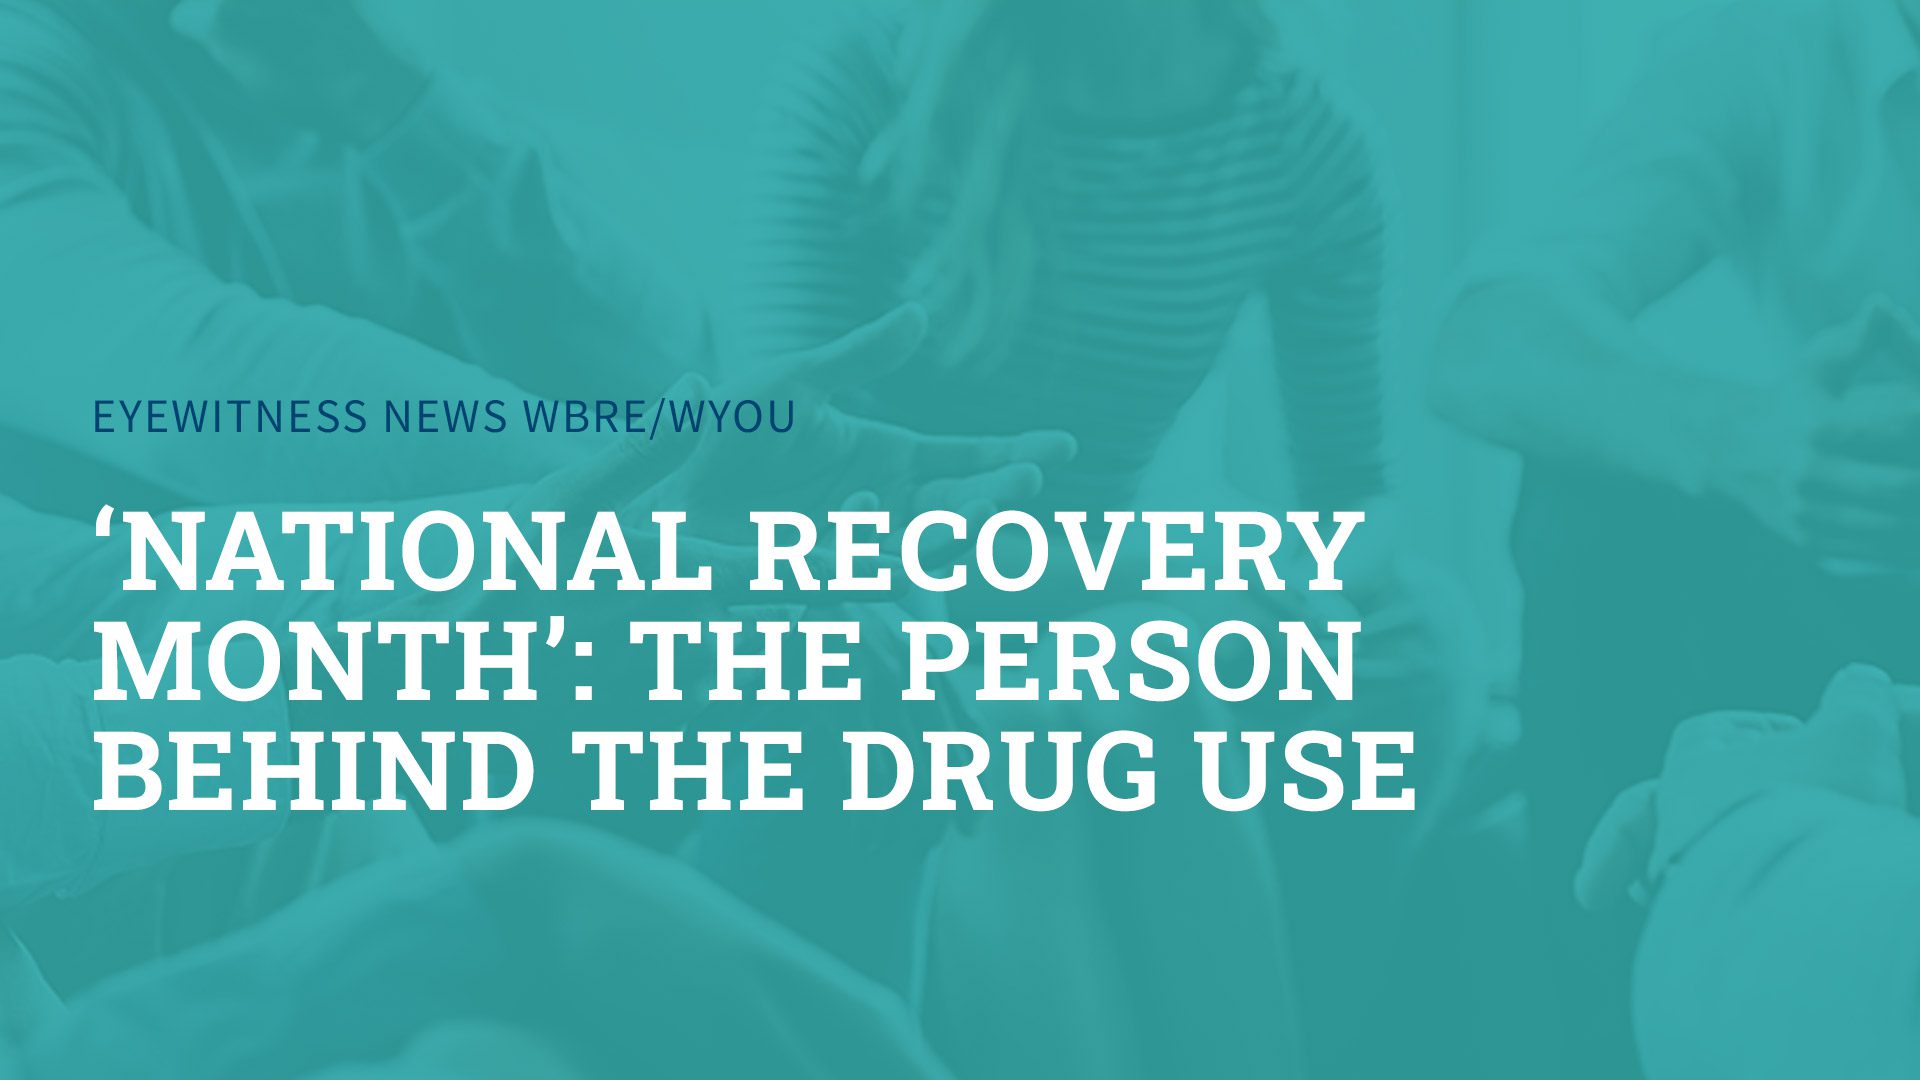 ‘National Recovery Month’: The person behind the drug use